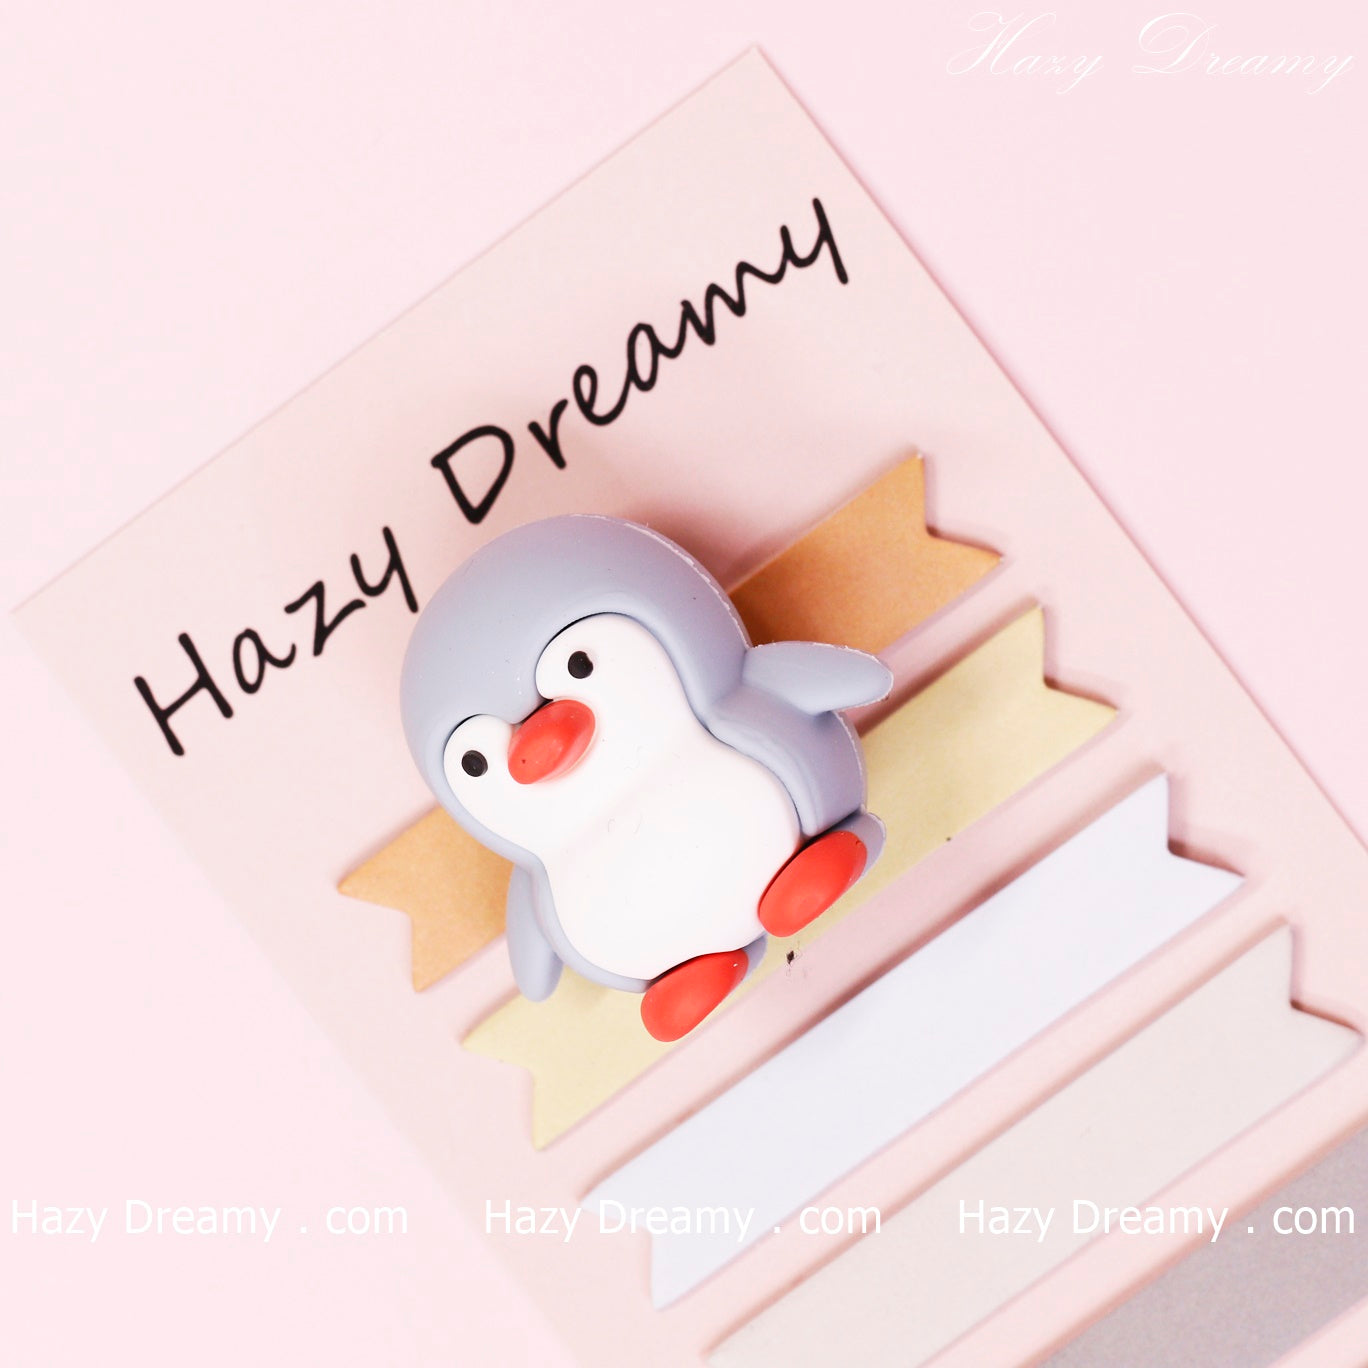 Cute Penguin 3D Eraser - Perfect for Students and Stationery Lovers